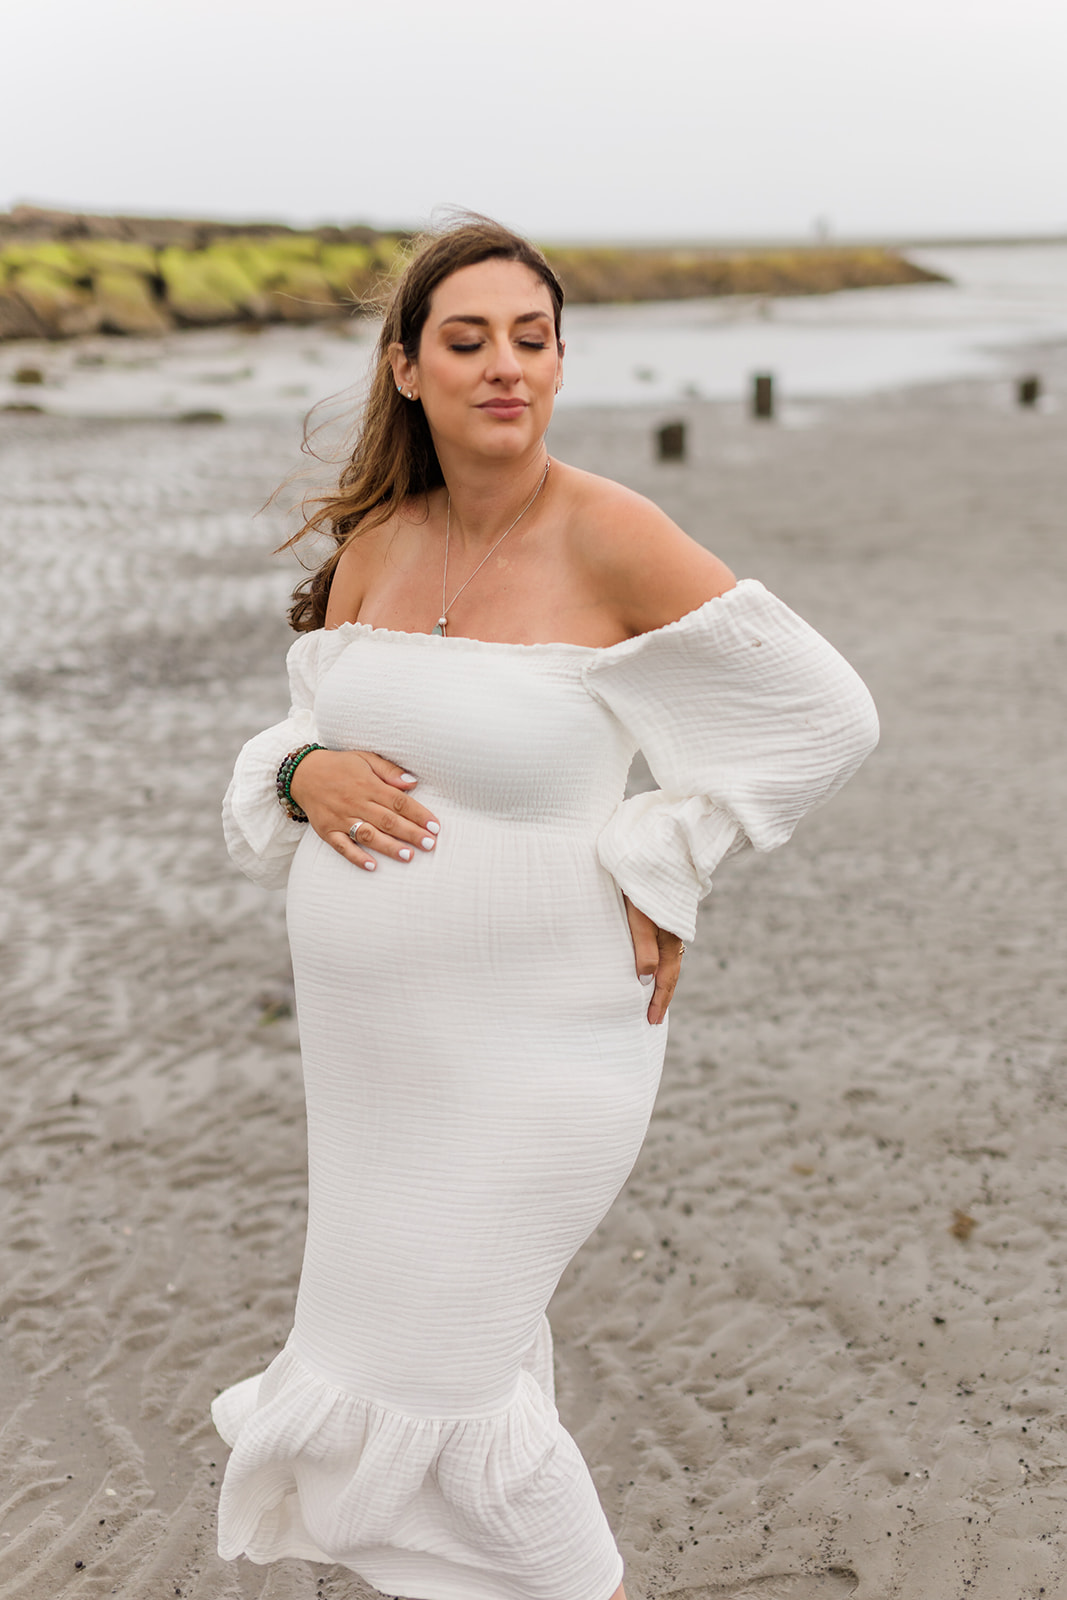 A mom to be stands on a beach in a white maternity dress on a windy day after visiting Sabita Holistic Center